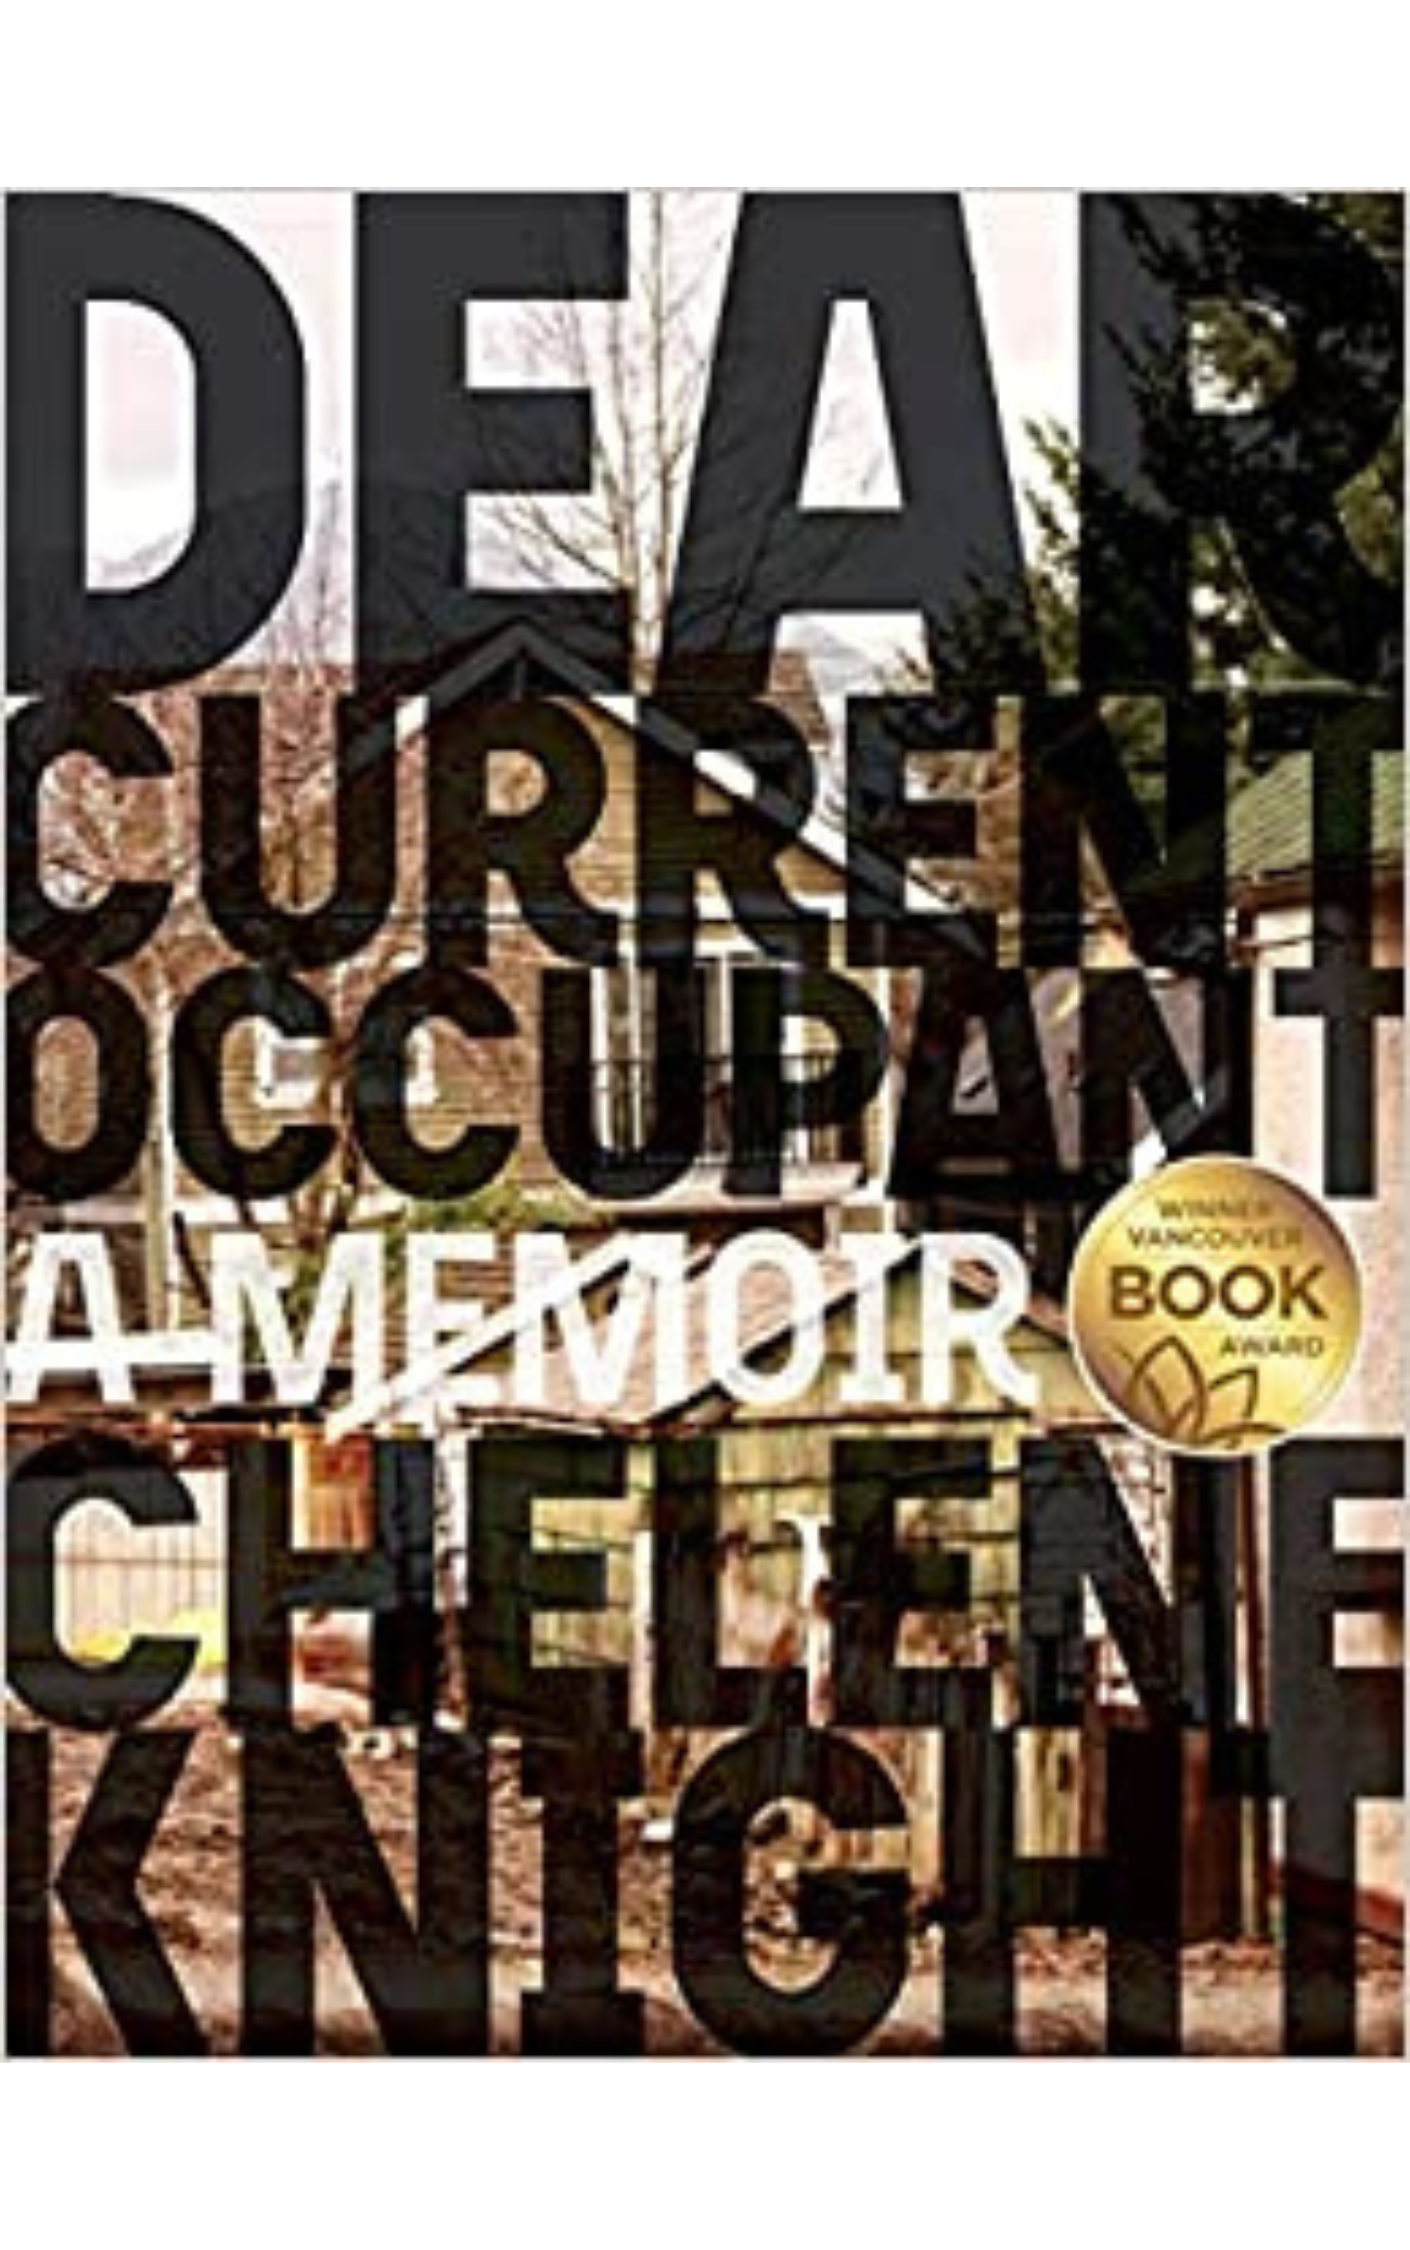 Dear Current Occupant by Chelene Knight